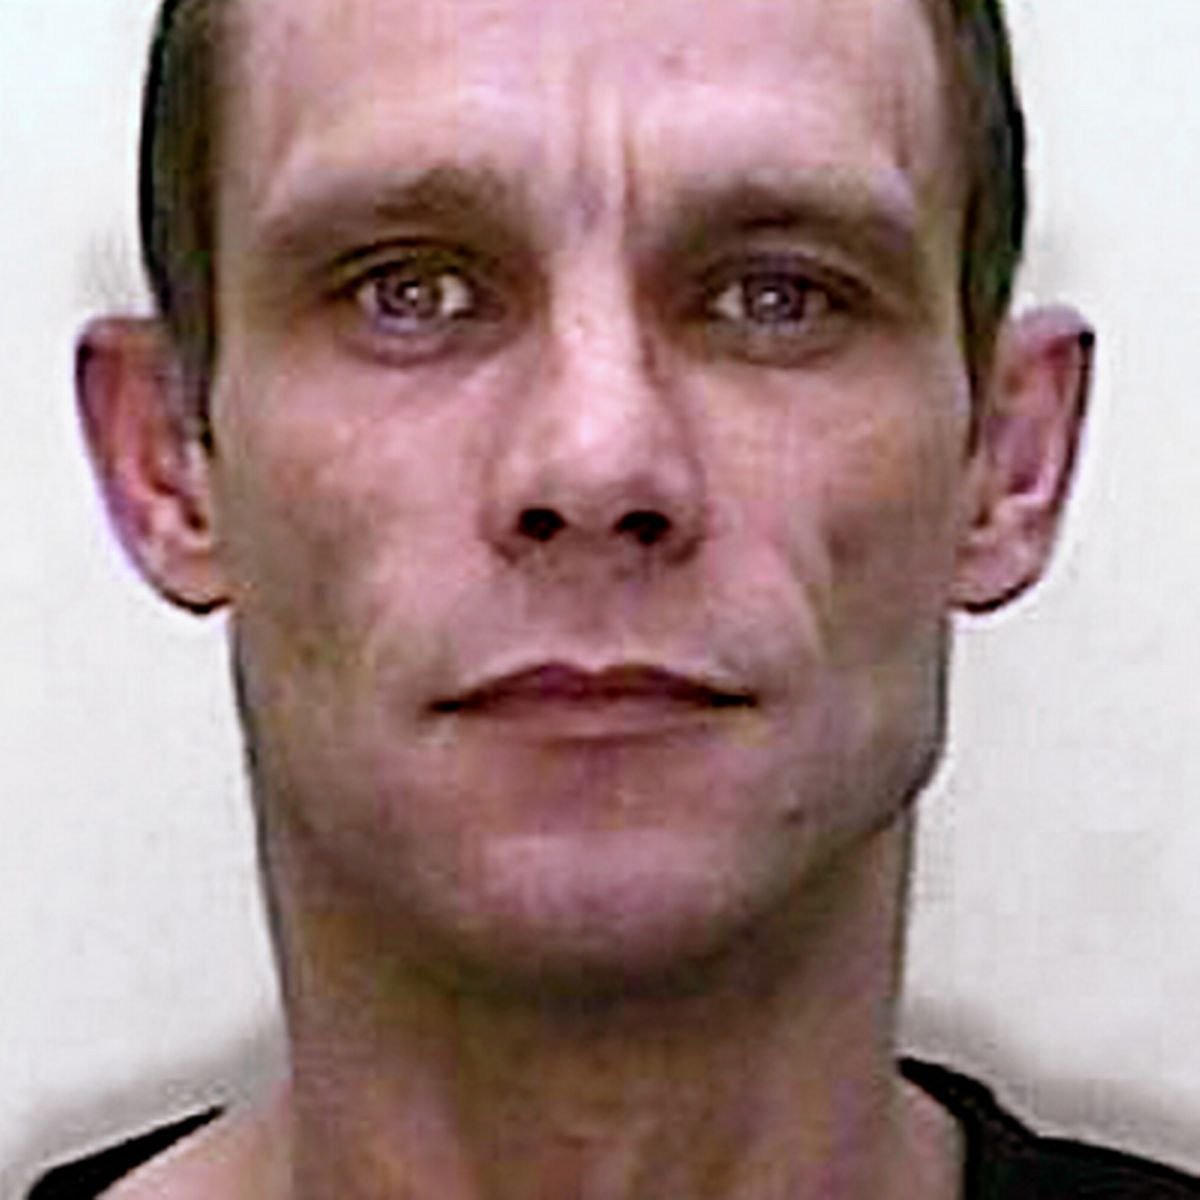 Chris Halliwell has been suspected in Claudia Lawrence's death